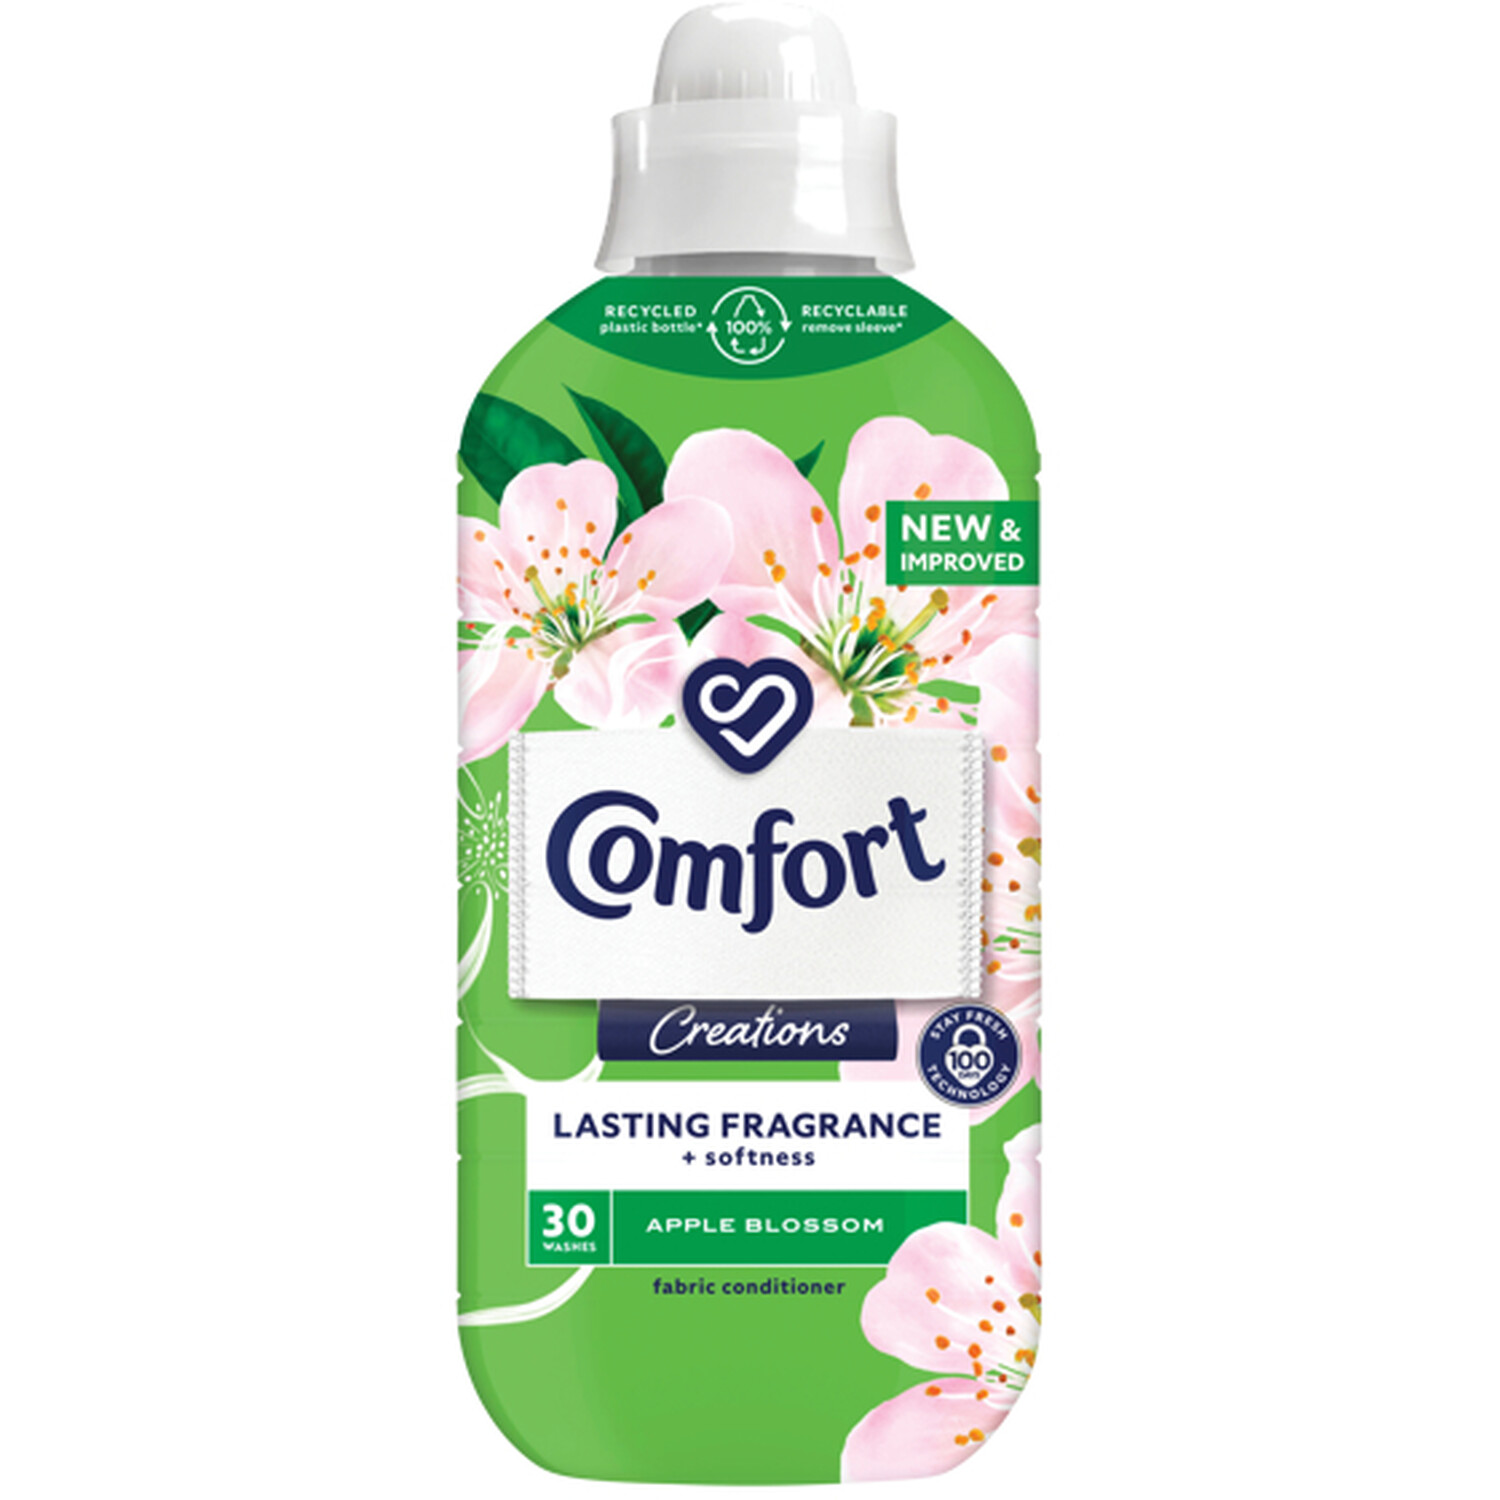 Comfort Apple Blossom Fabric Conditioner 30 Washes 900ml Image